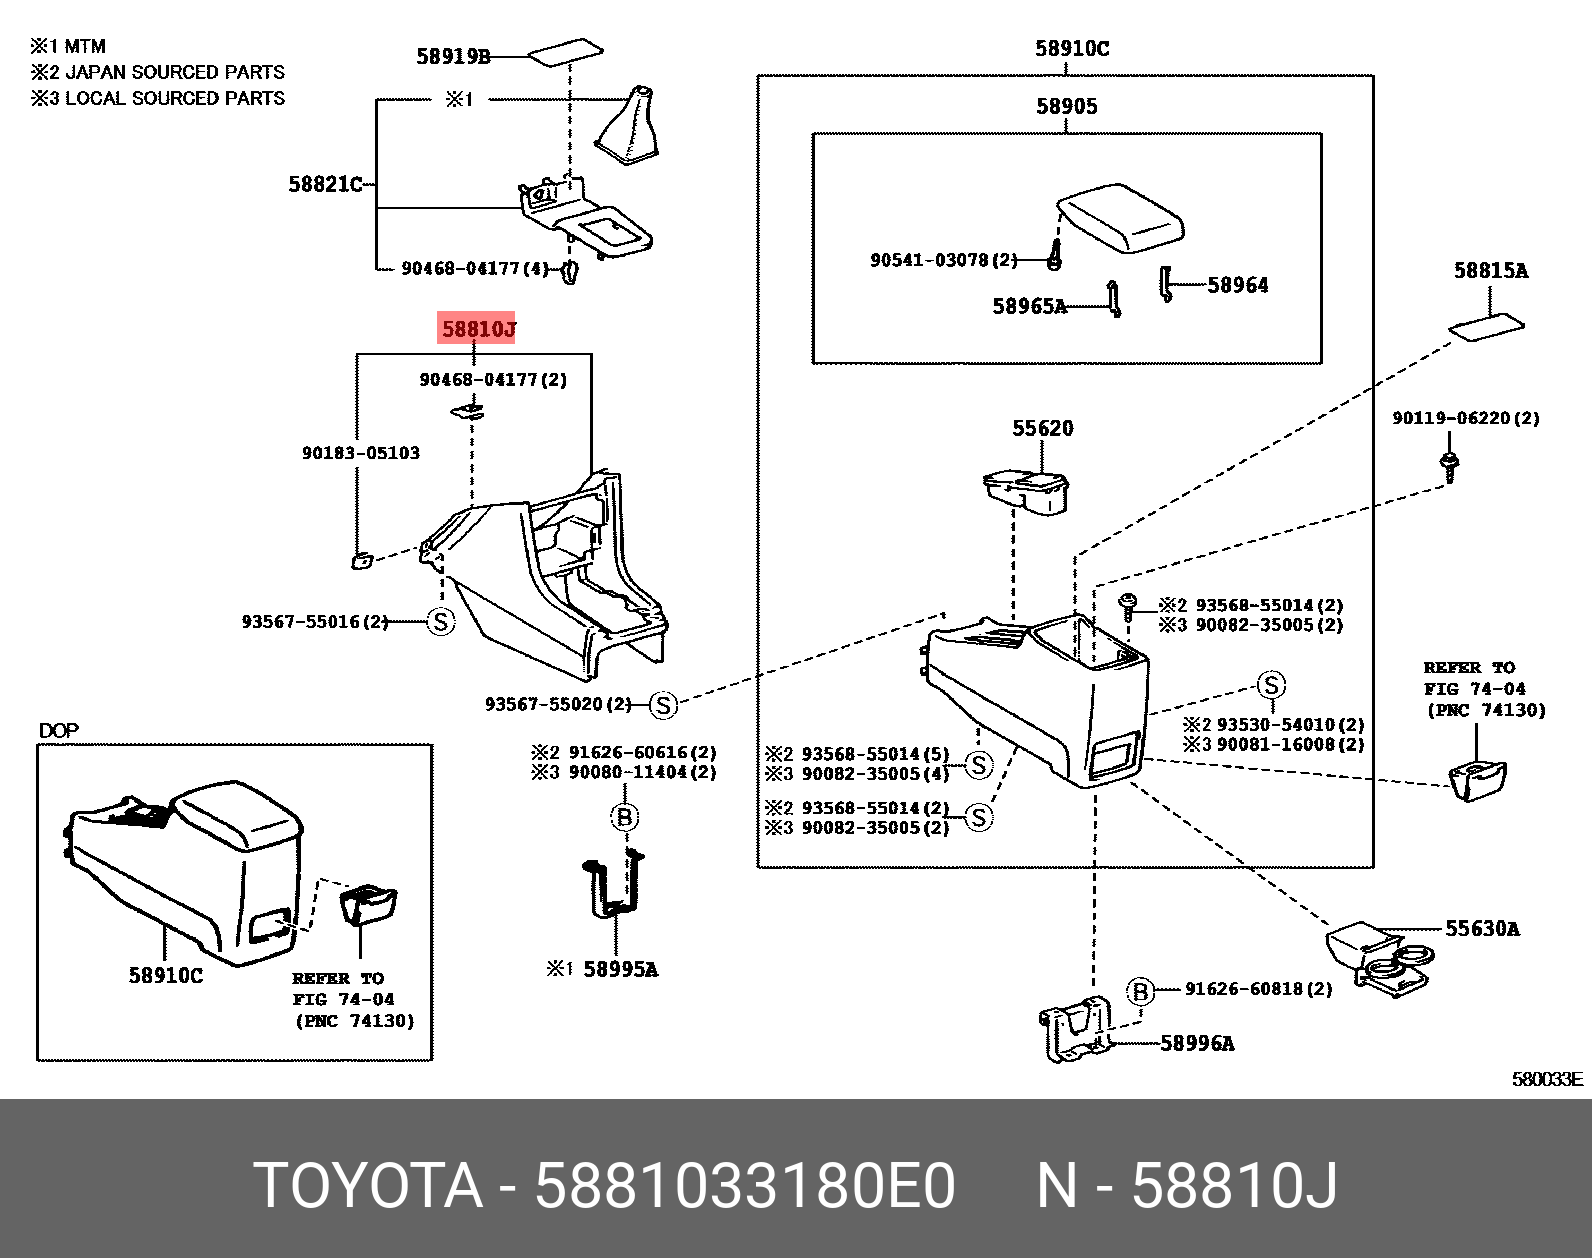 CAMRY 200601 - 201108, BOX ASSY, CONSOLE